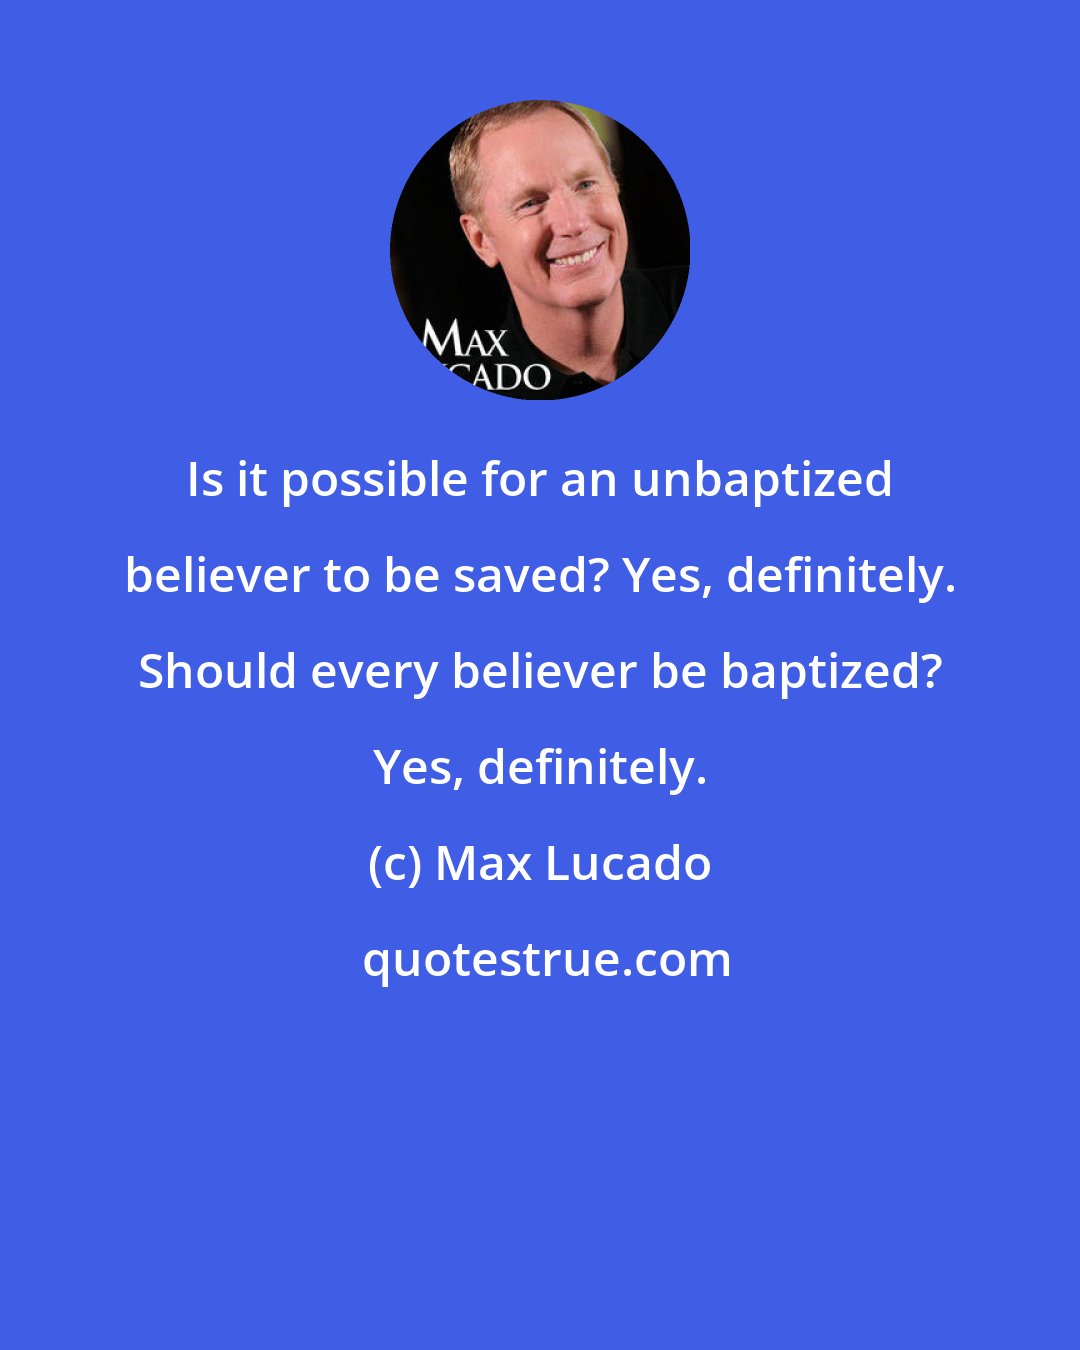 Max Lucado: Is it possible for an unbaptized believer to be saved? Yes, definitely. Should every believer be baptized? Yes, definitely.